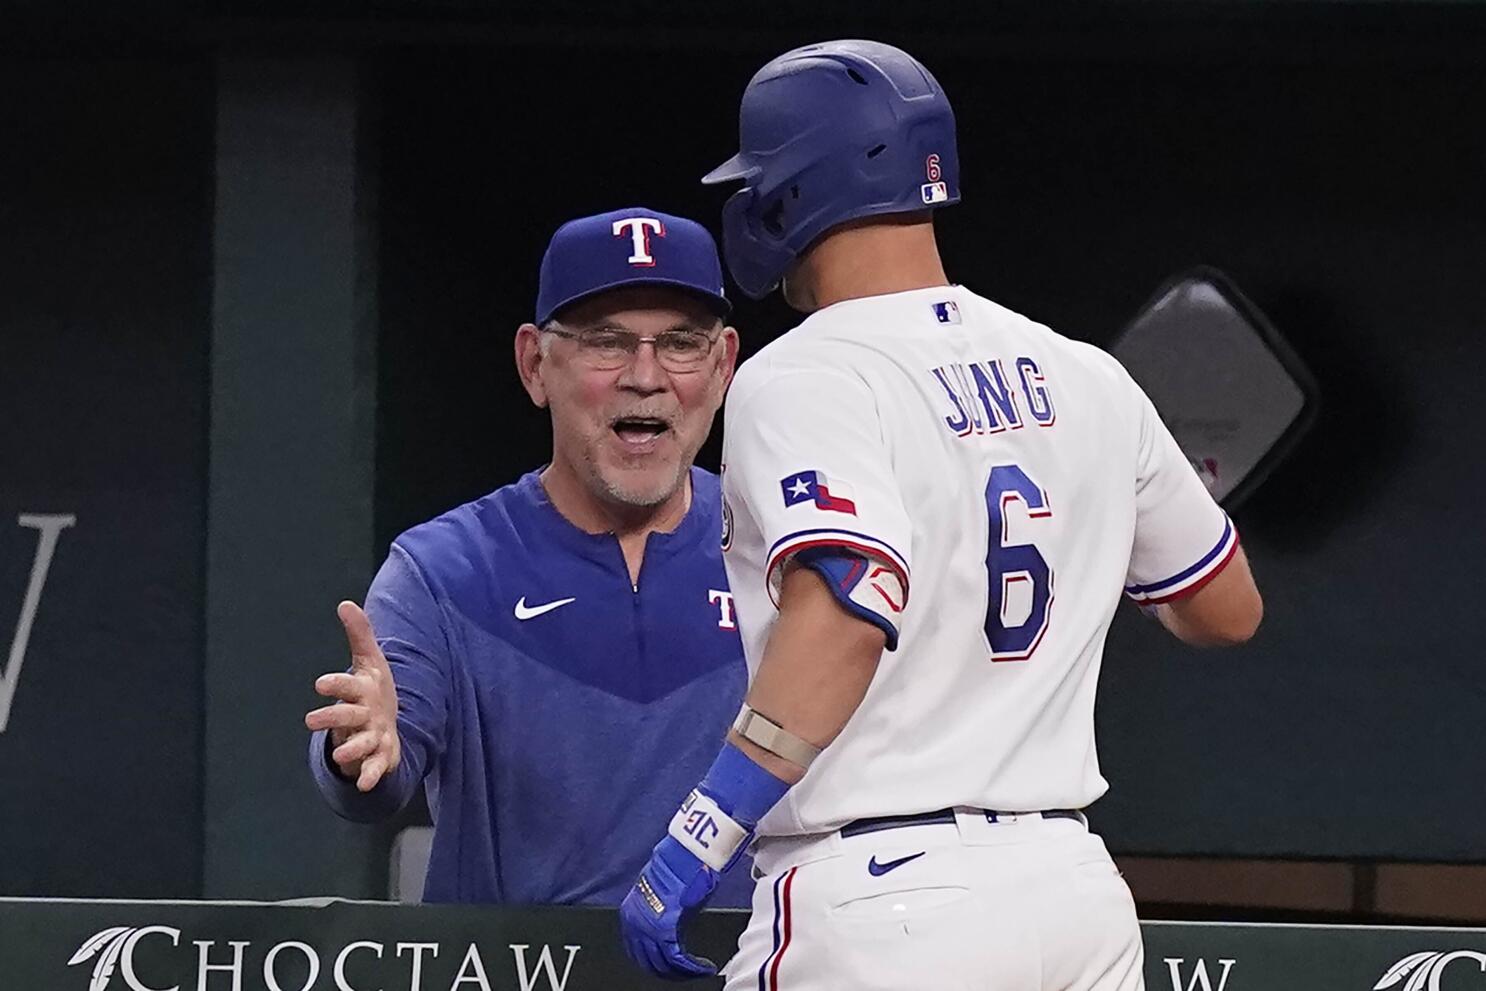 Texas Rangers lineup for July 31, 2022 - Lone Star Ball